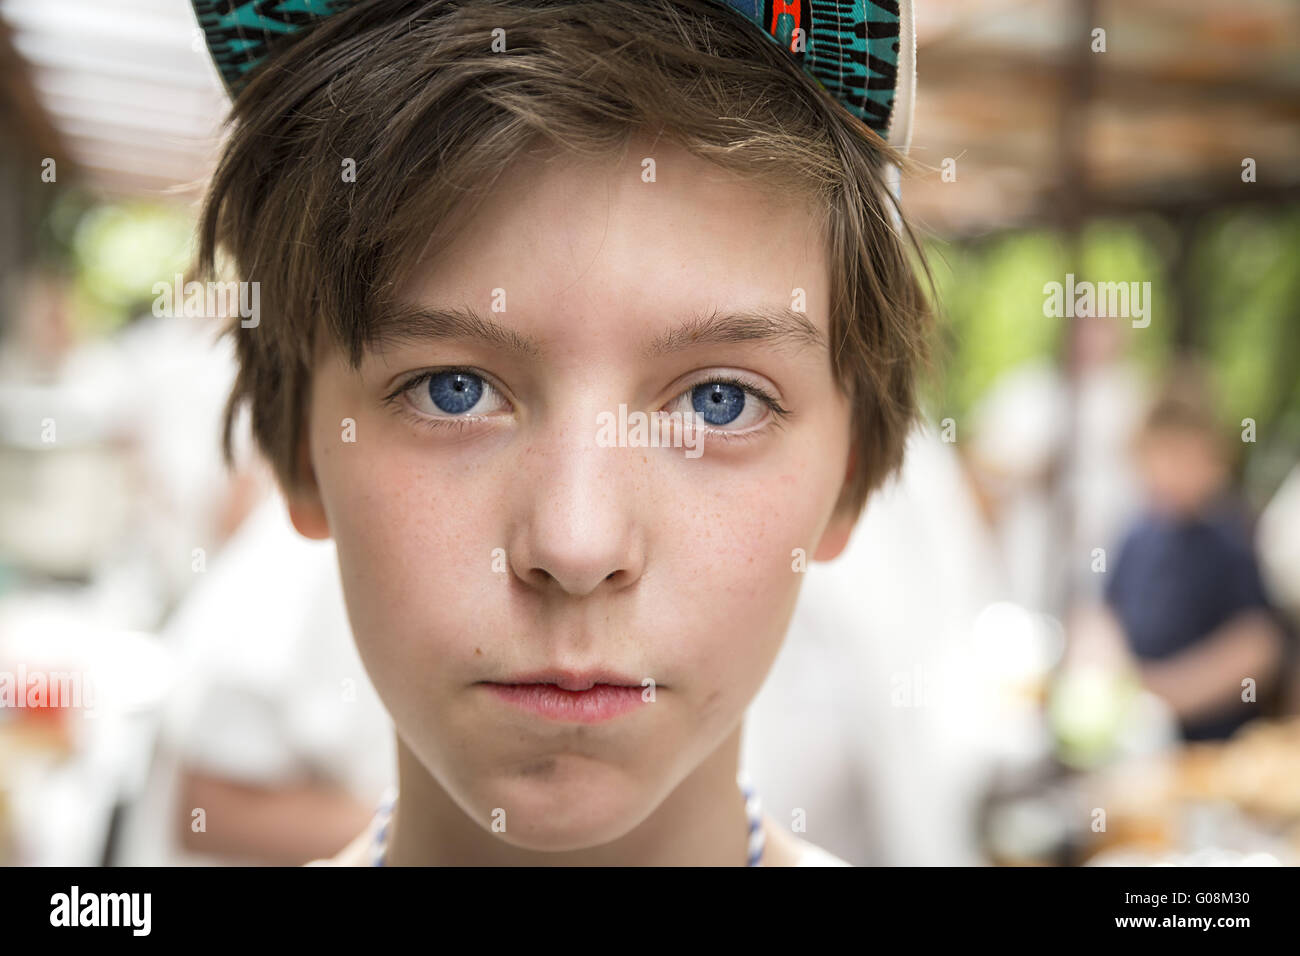 young boy with basecap looking into the camera, blurred people in background Stock Photo